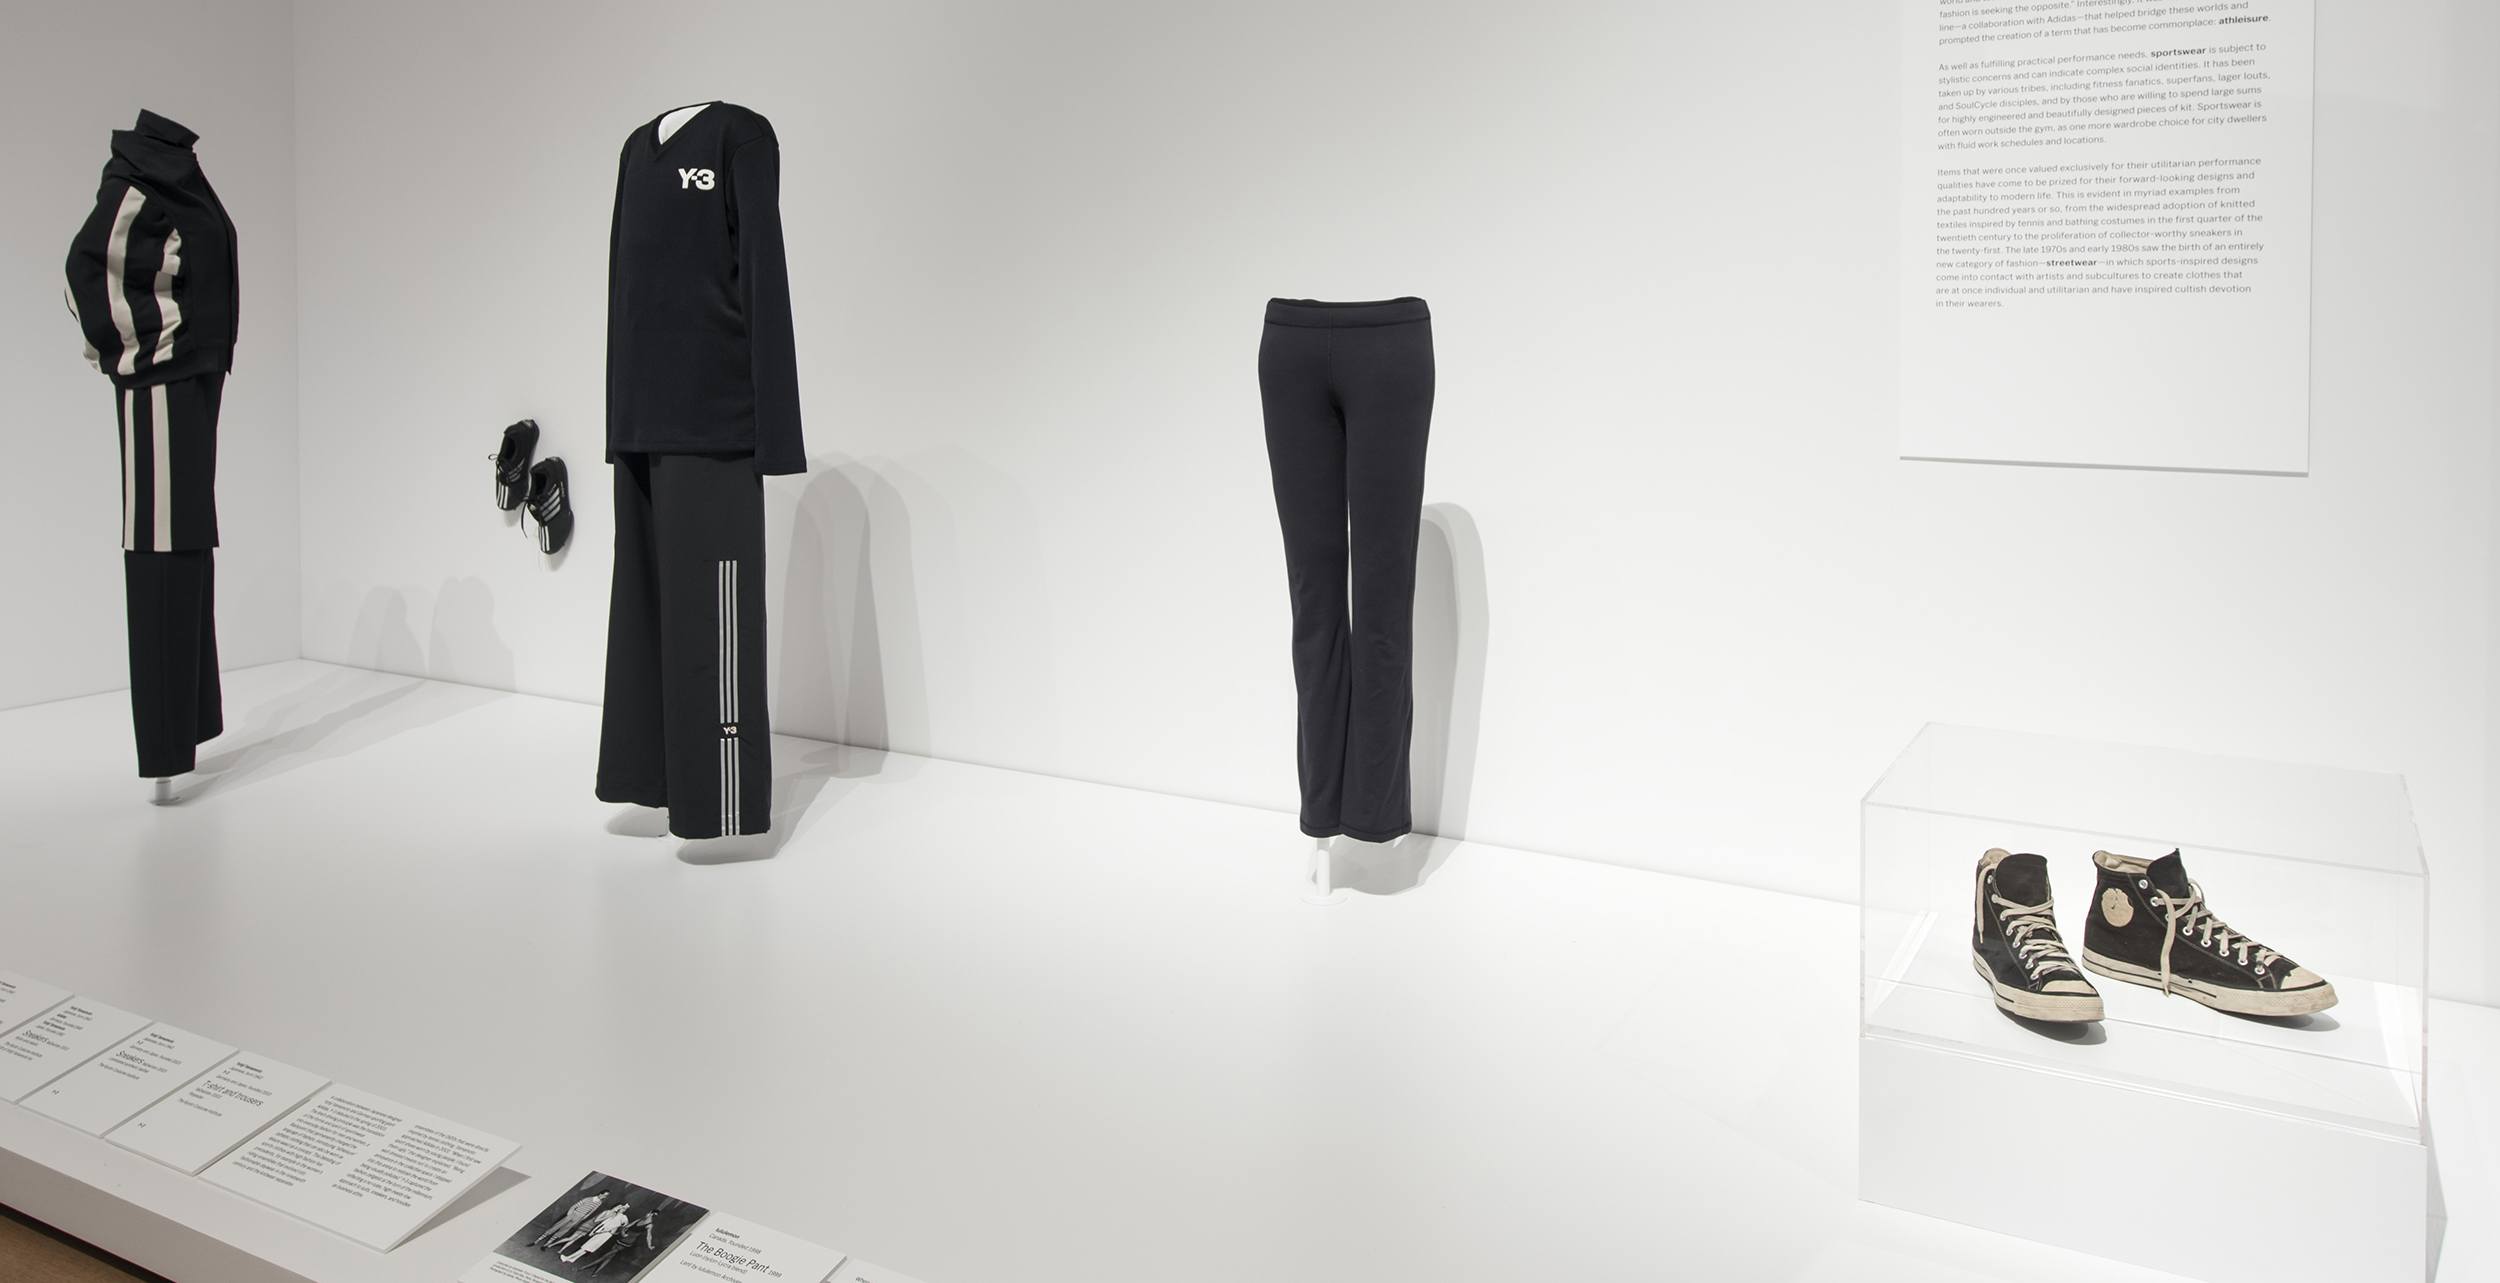 Installation-view-including-Lululemon-yoga-pants-of-Items-Is-Fashion-Modern-The-Museum-of-Modern-Art-New-York-October-1-2017-January-28-2018